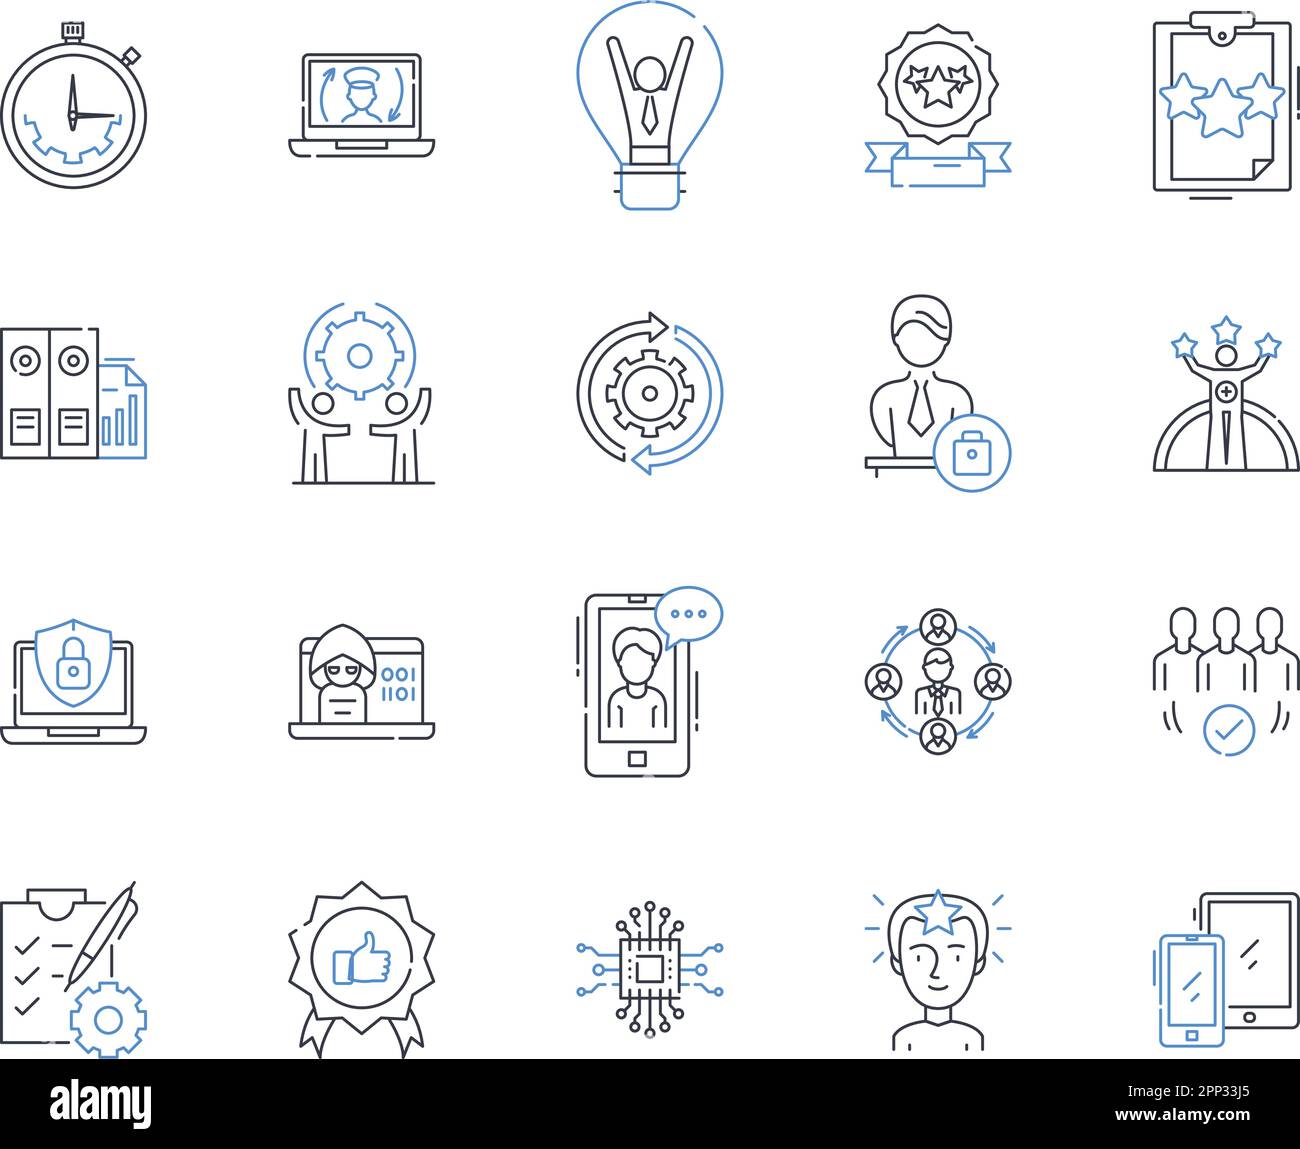 Strategic unions line icons collection. Alliance, Collaboration, Partnership, Synergy, Integration, Unity, Bonding vector and linear illustration Stock Vector